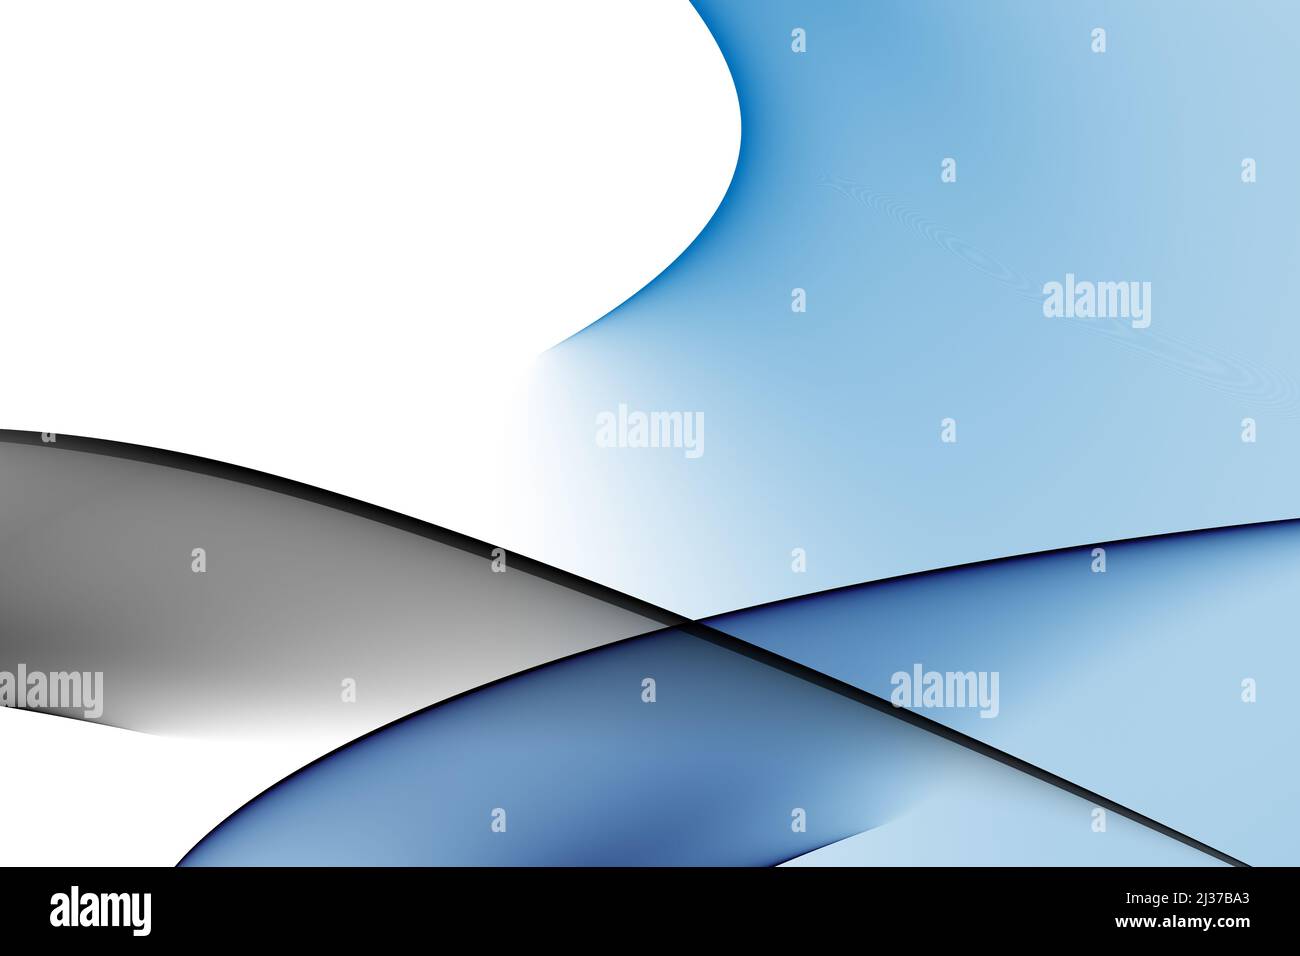 Abstract illustration of crossed waves of various shades of the blue spectrum of colors  in a white background Stock Photo